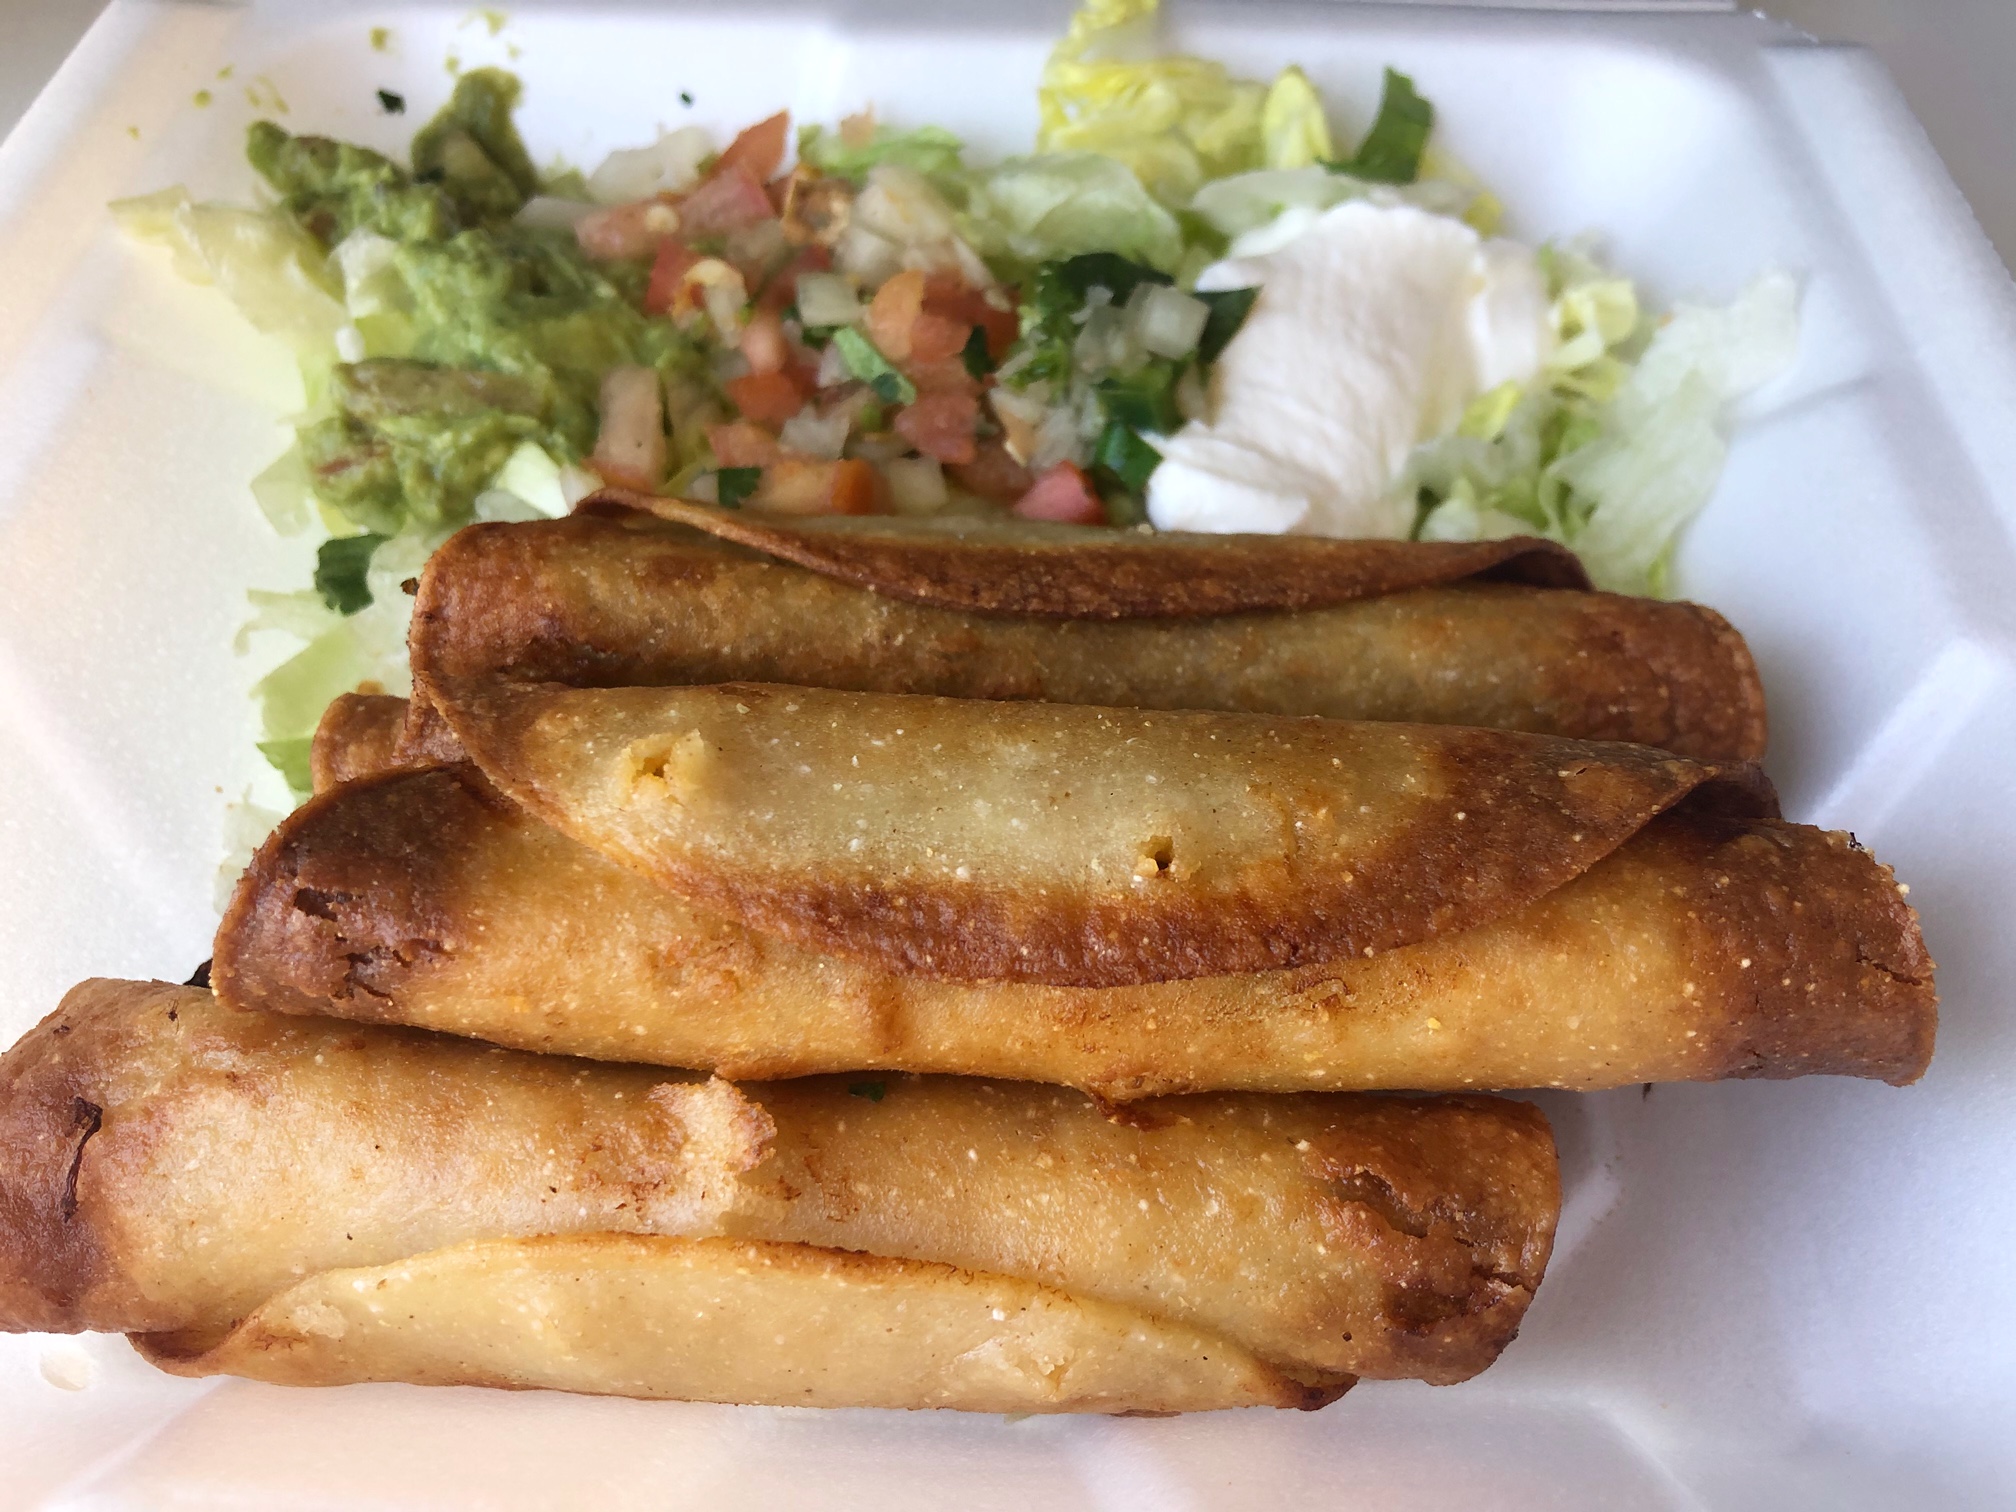 In a styrofoam takeout container, there are three flautas with brown edges from the fryer and in the two dividers behind, there is sour cream, guacamole, pico, and lettuce. Photo by Alyssa Buckley.